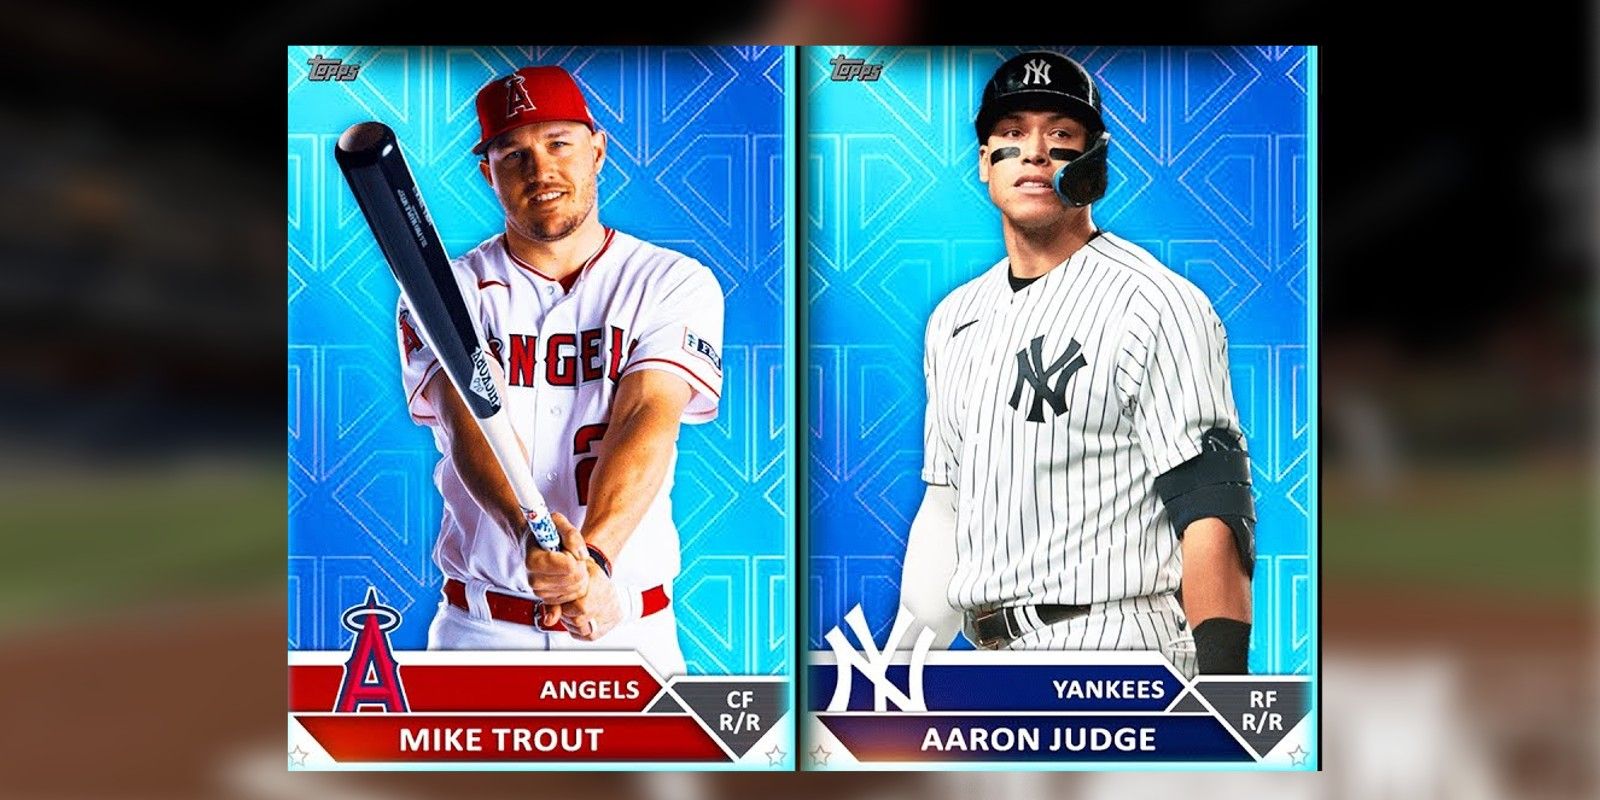 The two top hitters in MLB The Show 23 are Mike Trout and Aaron Judge